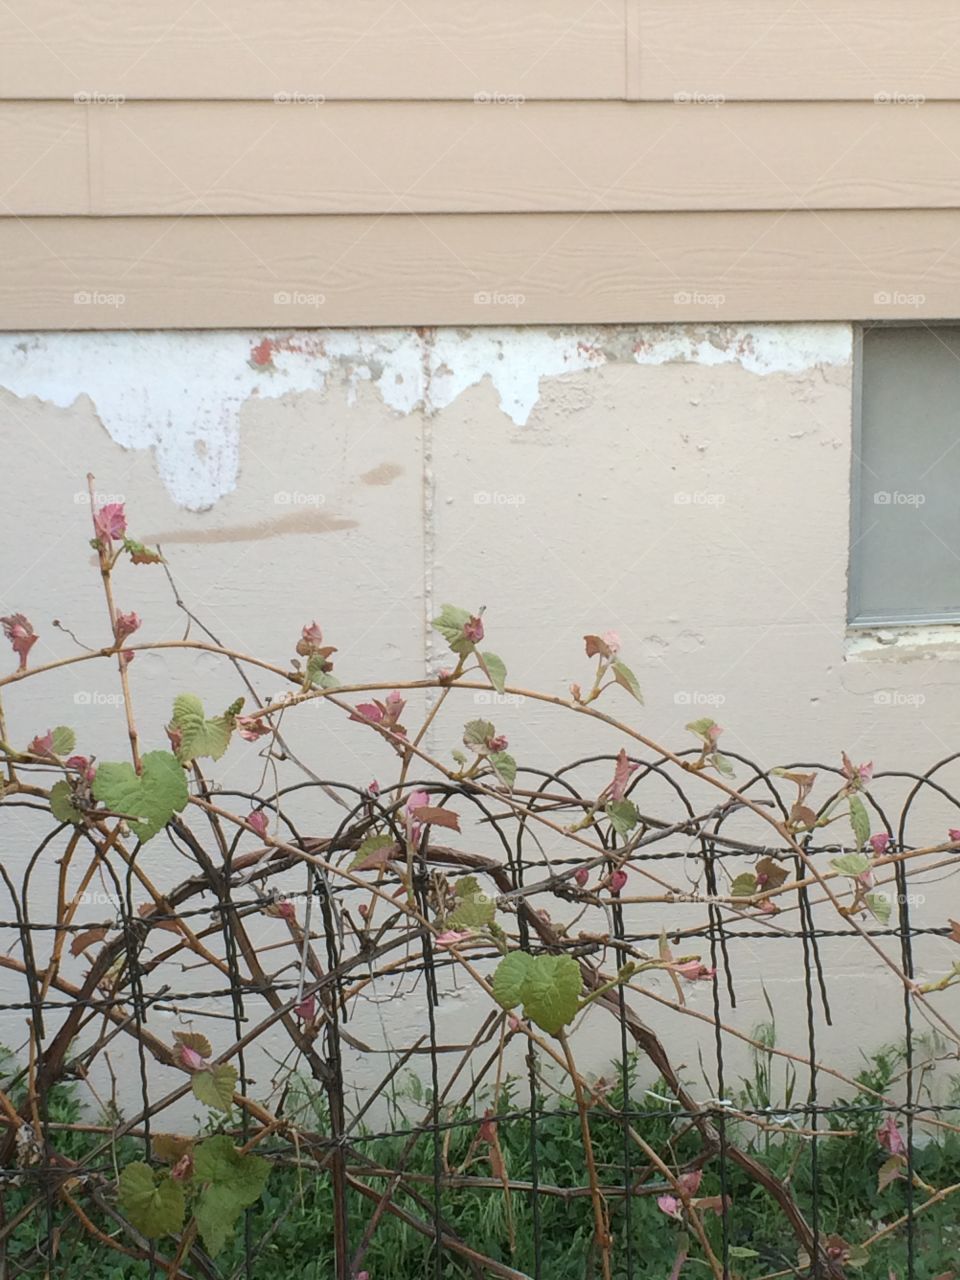 Wall, fence, and grape vines through window.
